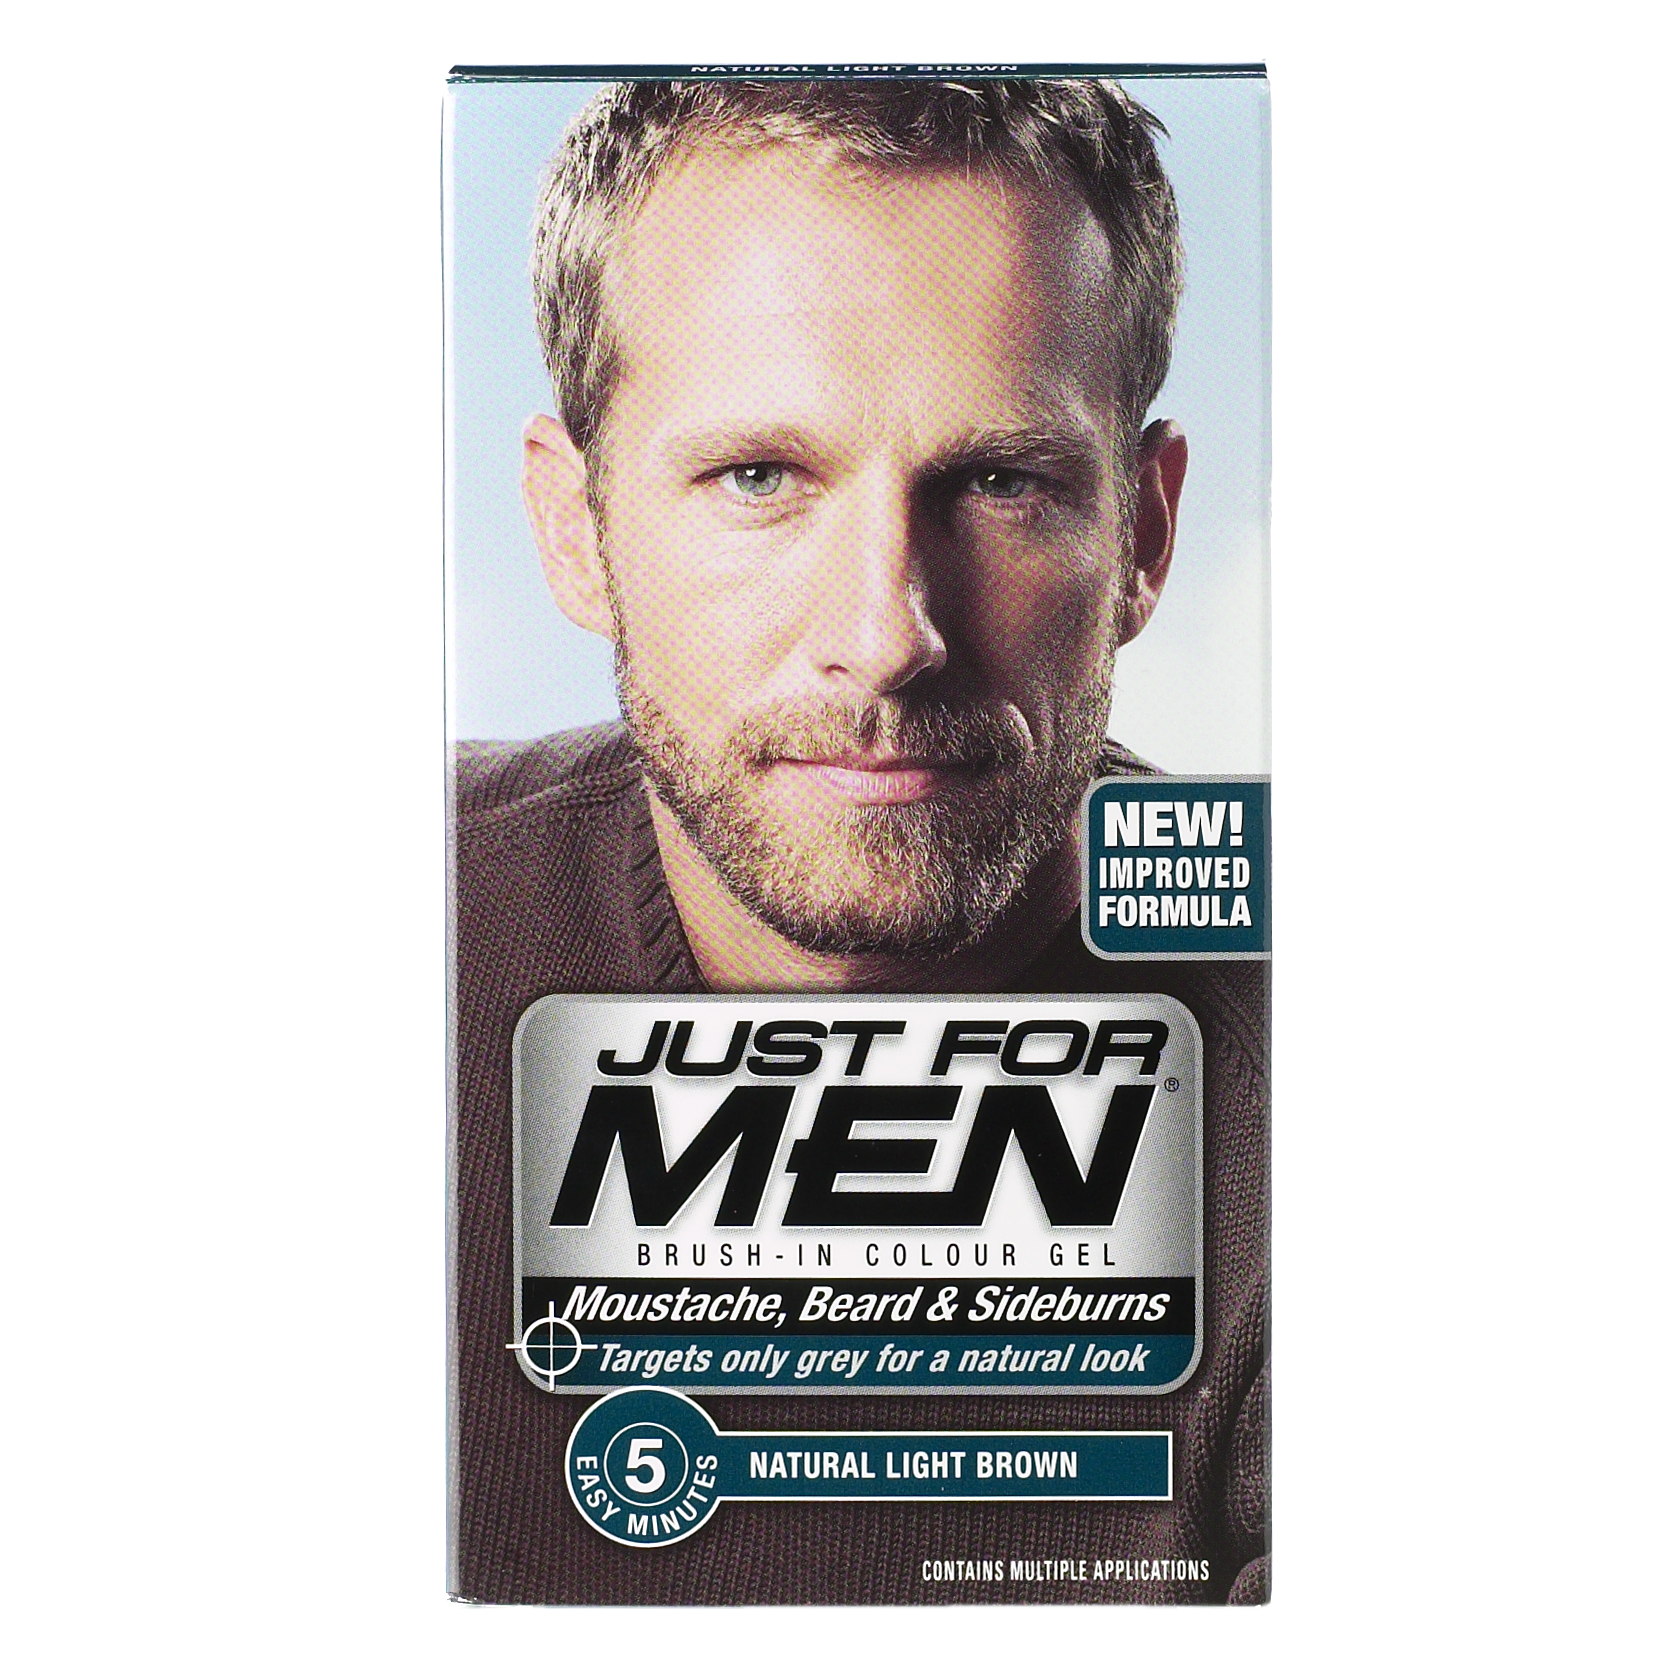 couponqueeny-daily-updates-2-00-just-for-men-coupon